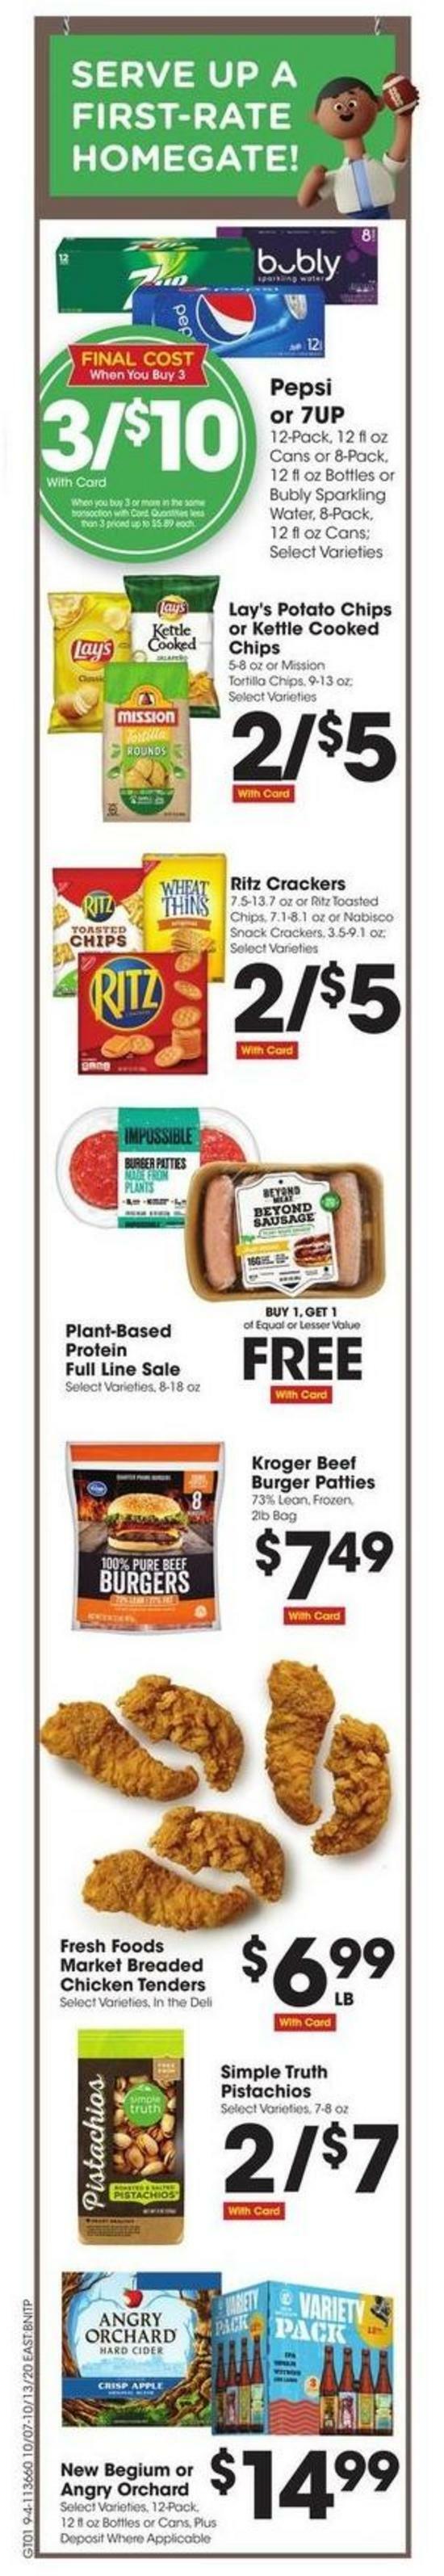 Fred Meyer Weekly Ad from October 7